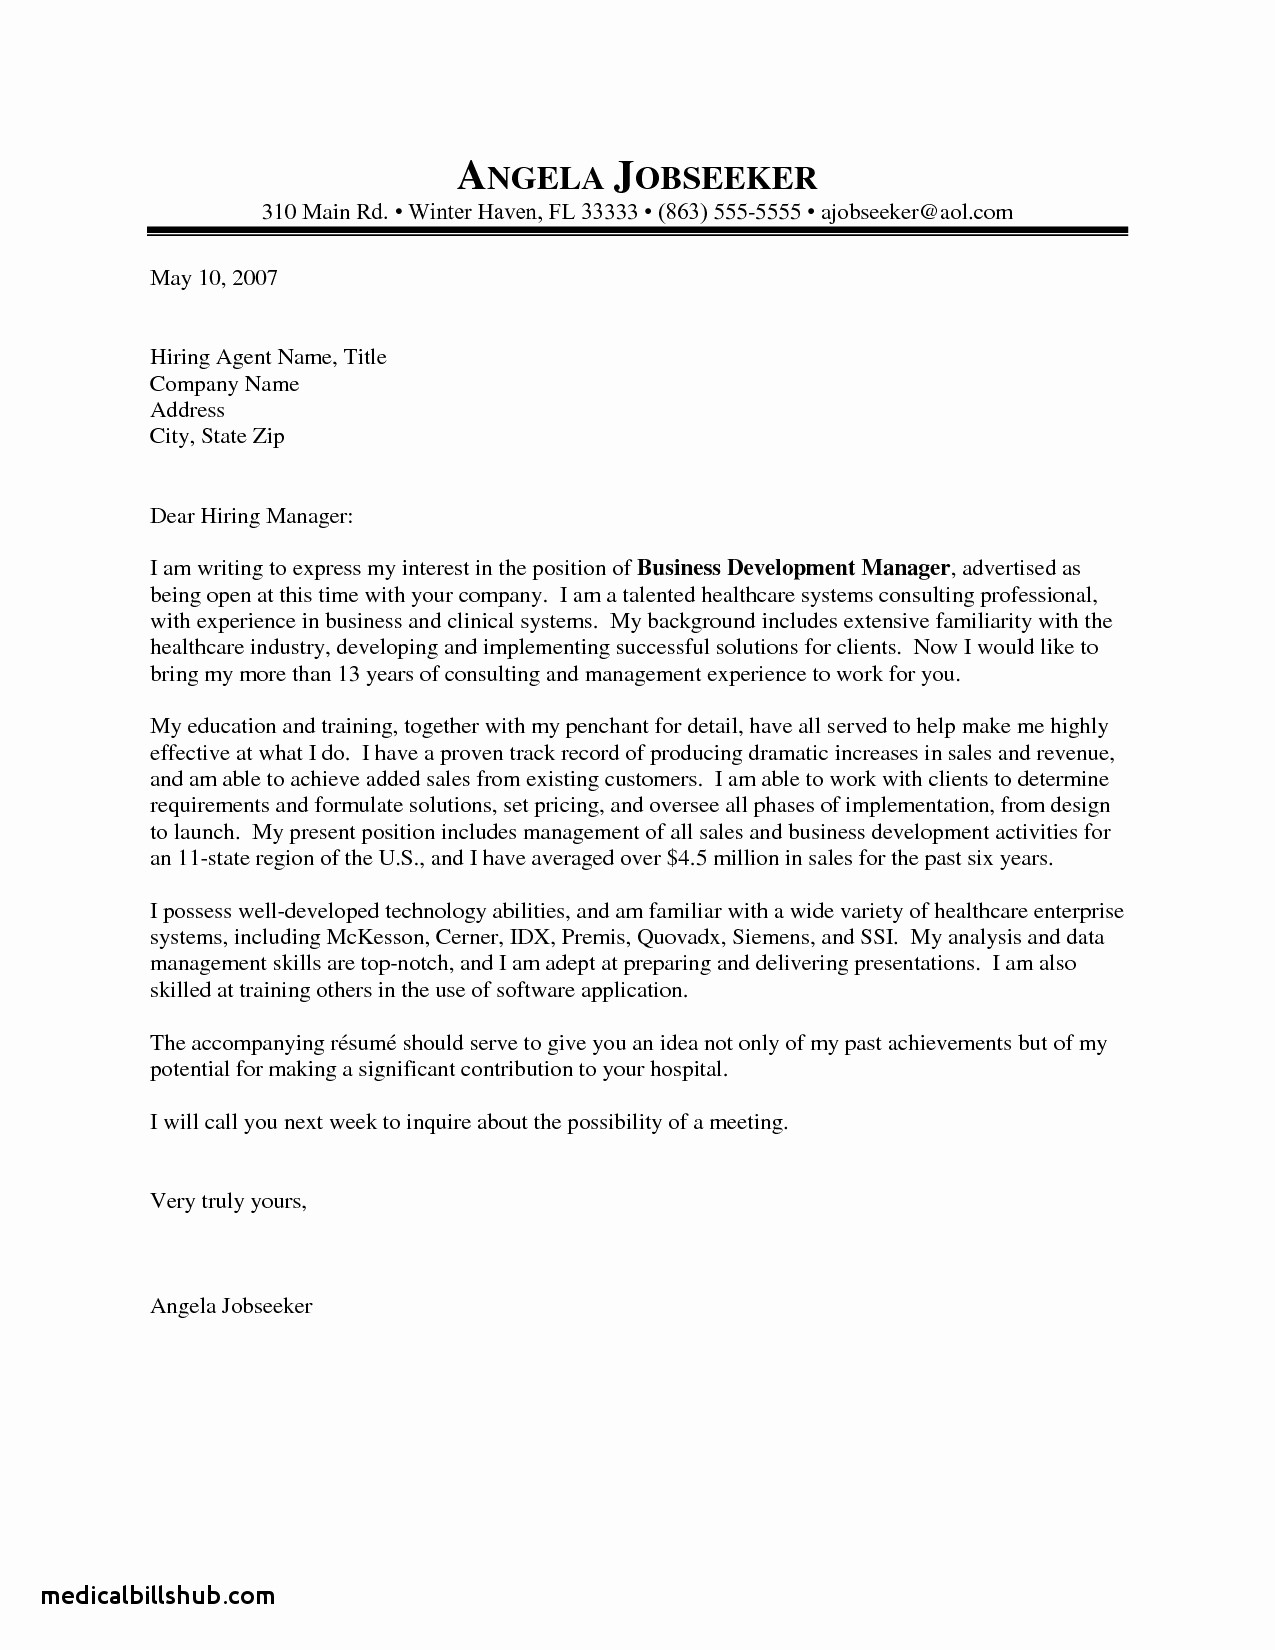 Health Care Letter Of Recommendation Inspirational Reference Letter for Home Health Aide